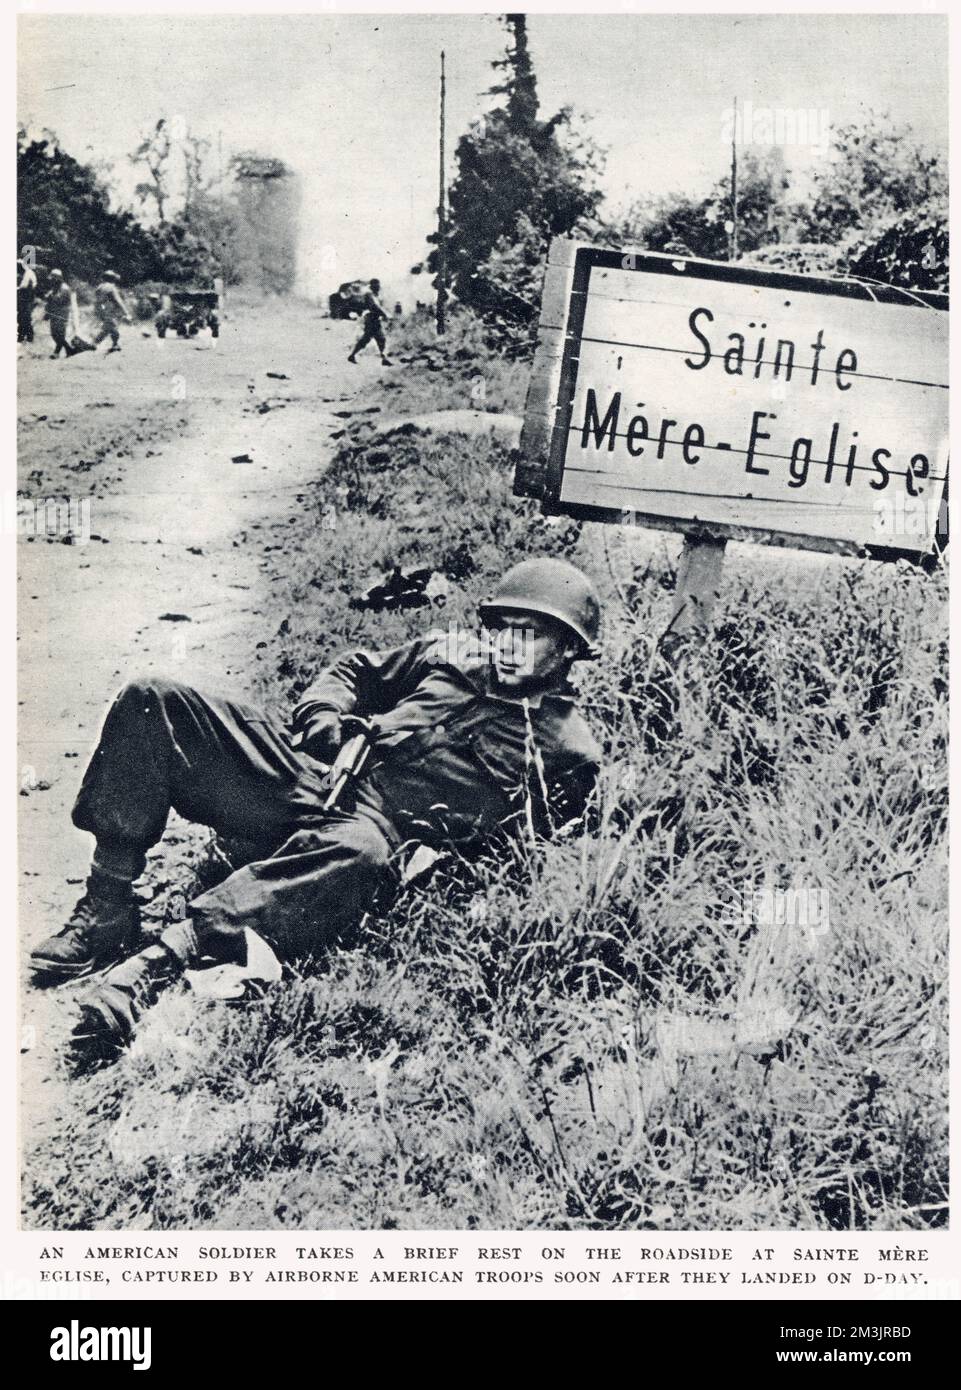 An American paratrooper taking a brief rest on the roadside at St. Mere Eglise, Normandy. This town was captured by airborne American troops soon after they landed on 'D-Day', 6th June 1944. Stock Photo